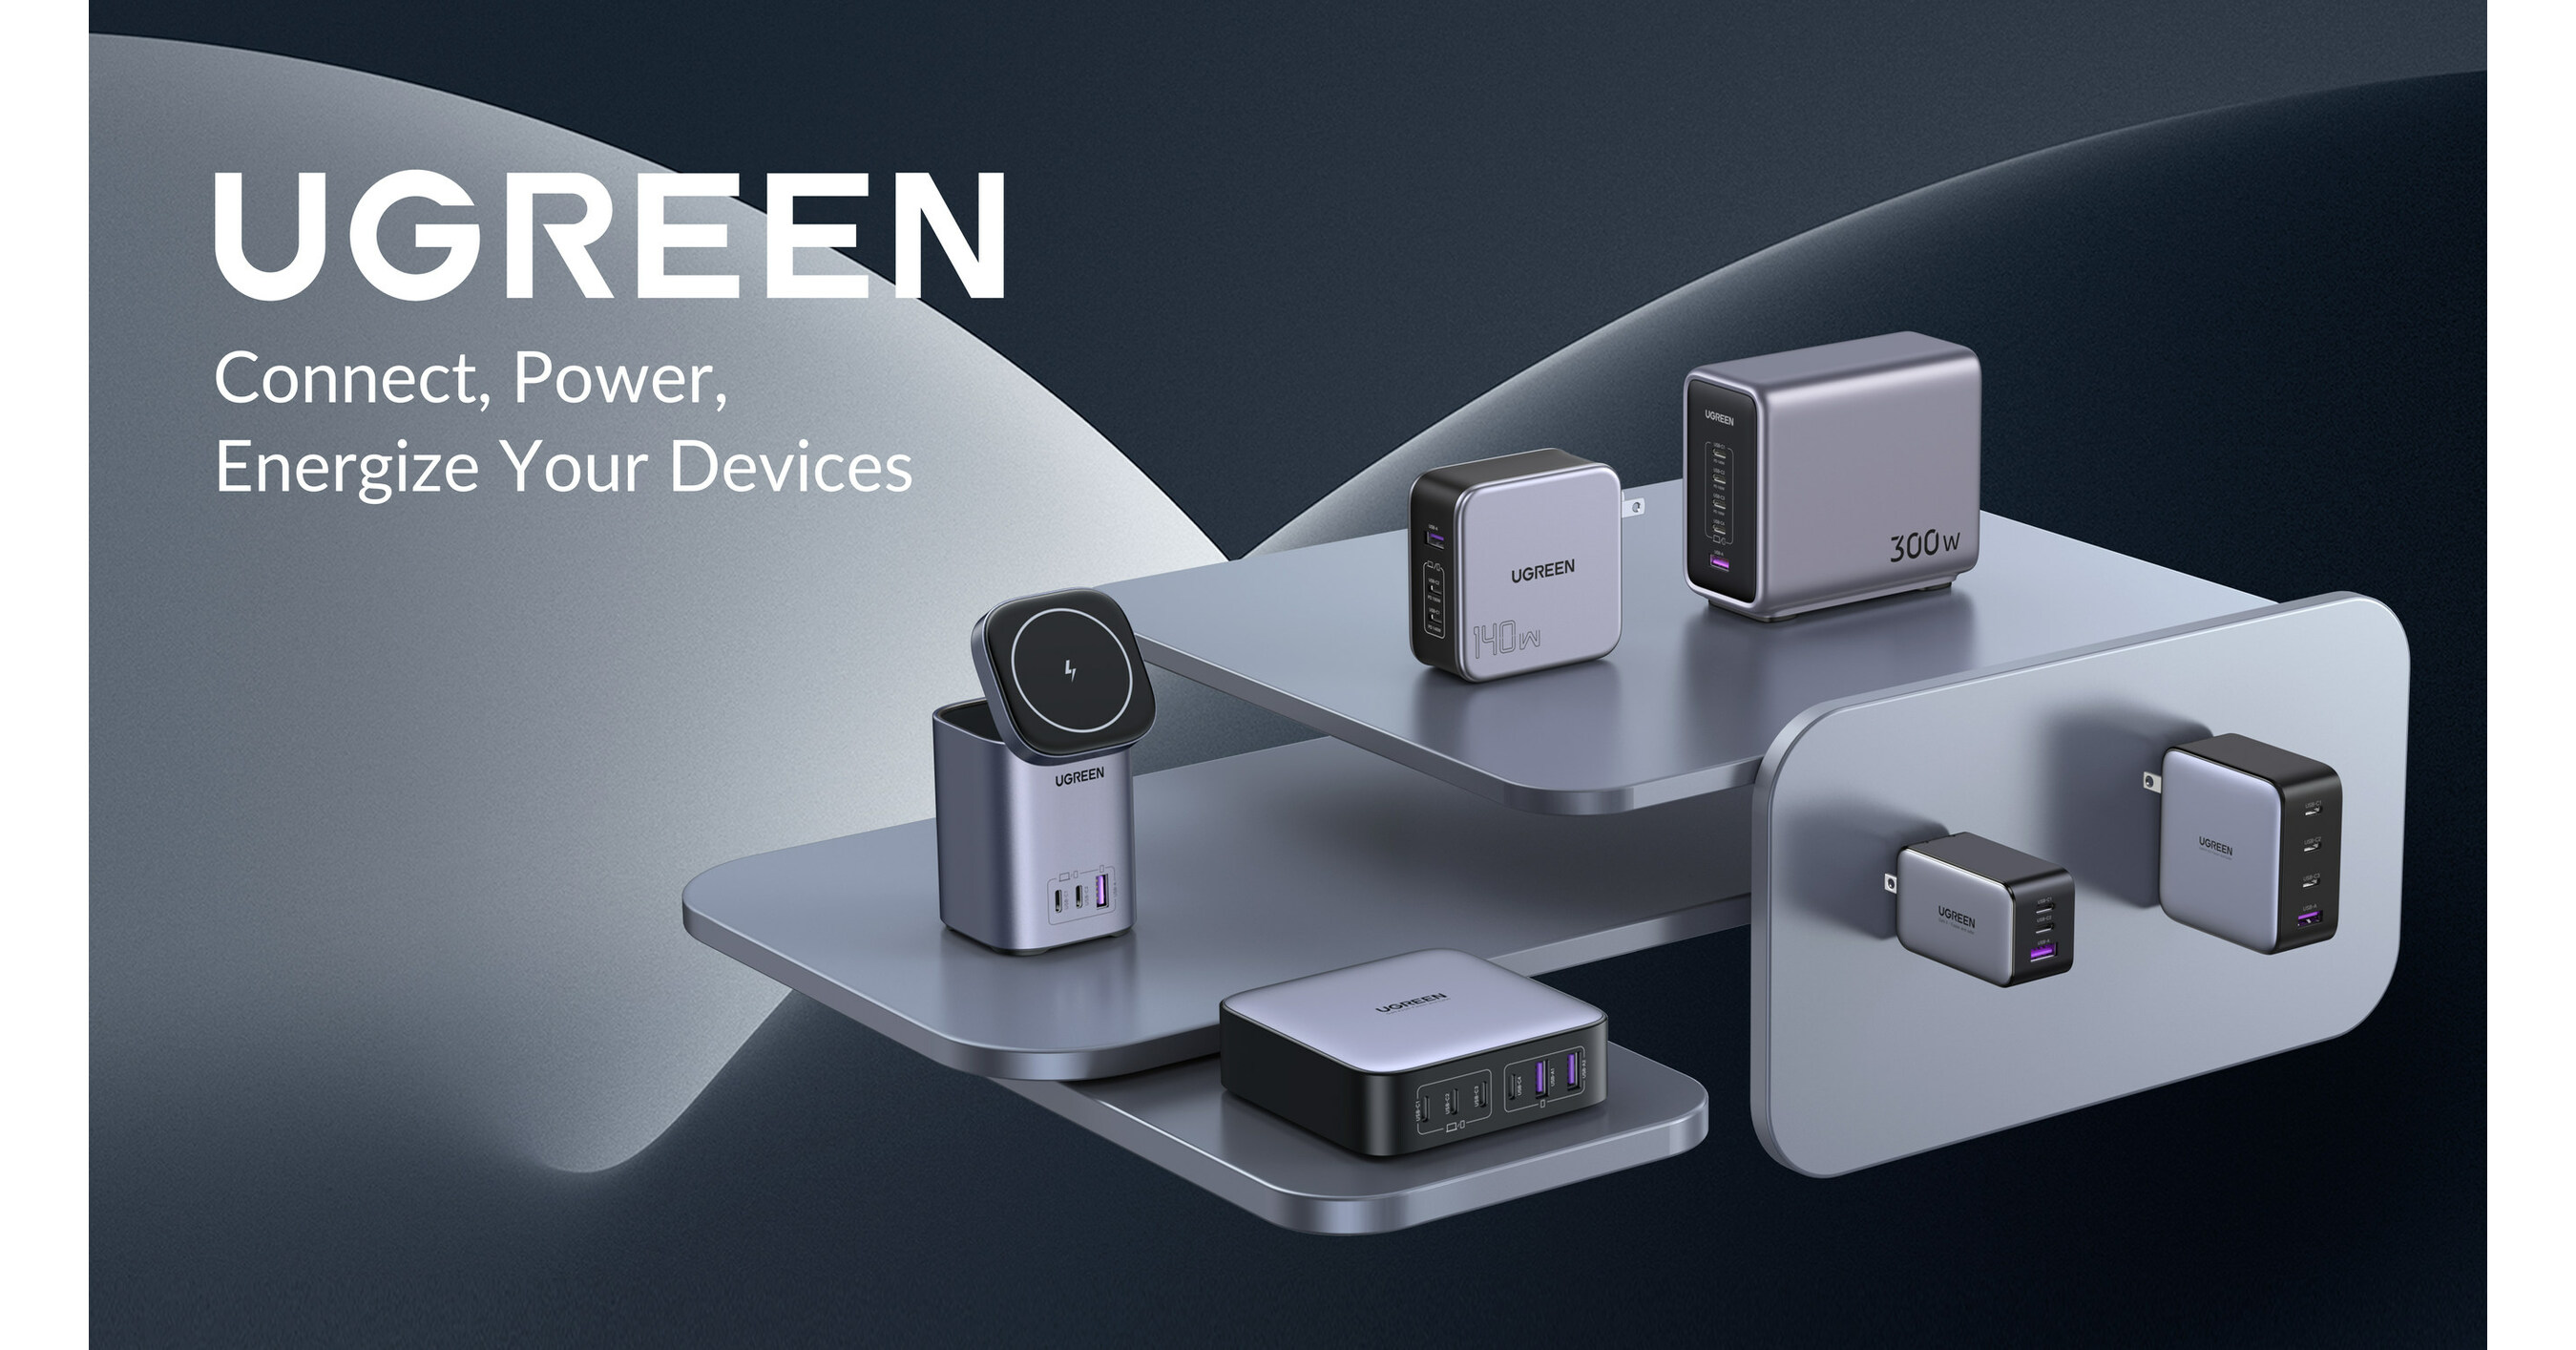 Ugreen unveils power solutions and personal data storage at the Gitex Trade  Show in United Arab Emirates.